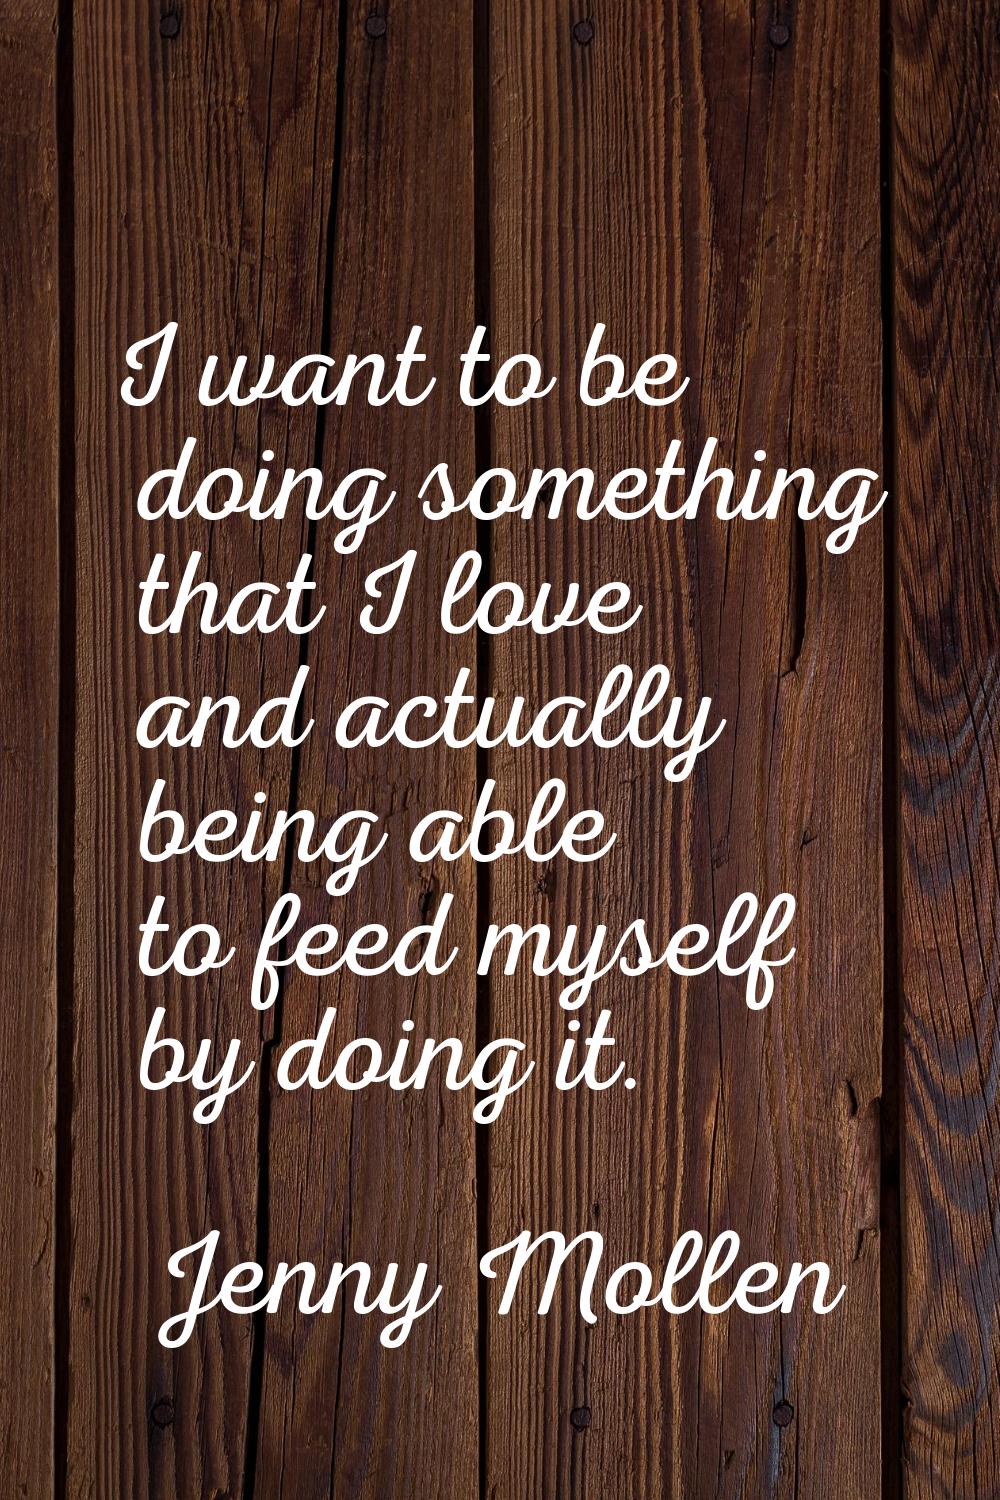 I want to be doing something that I love and actually being able to feed myself by doing it.